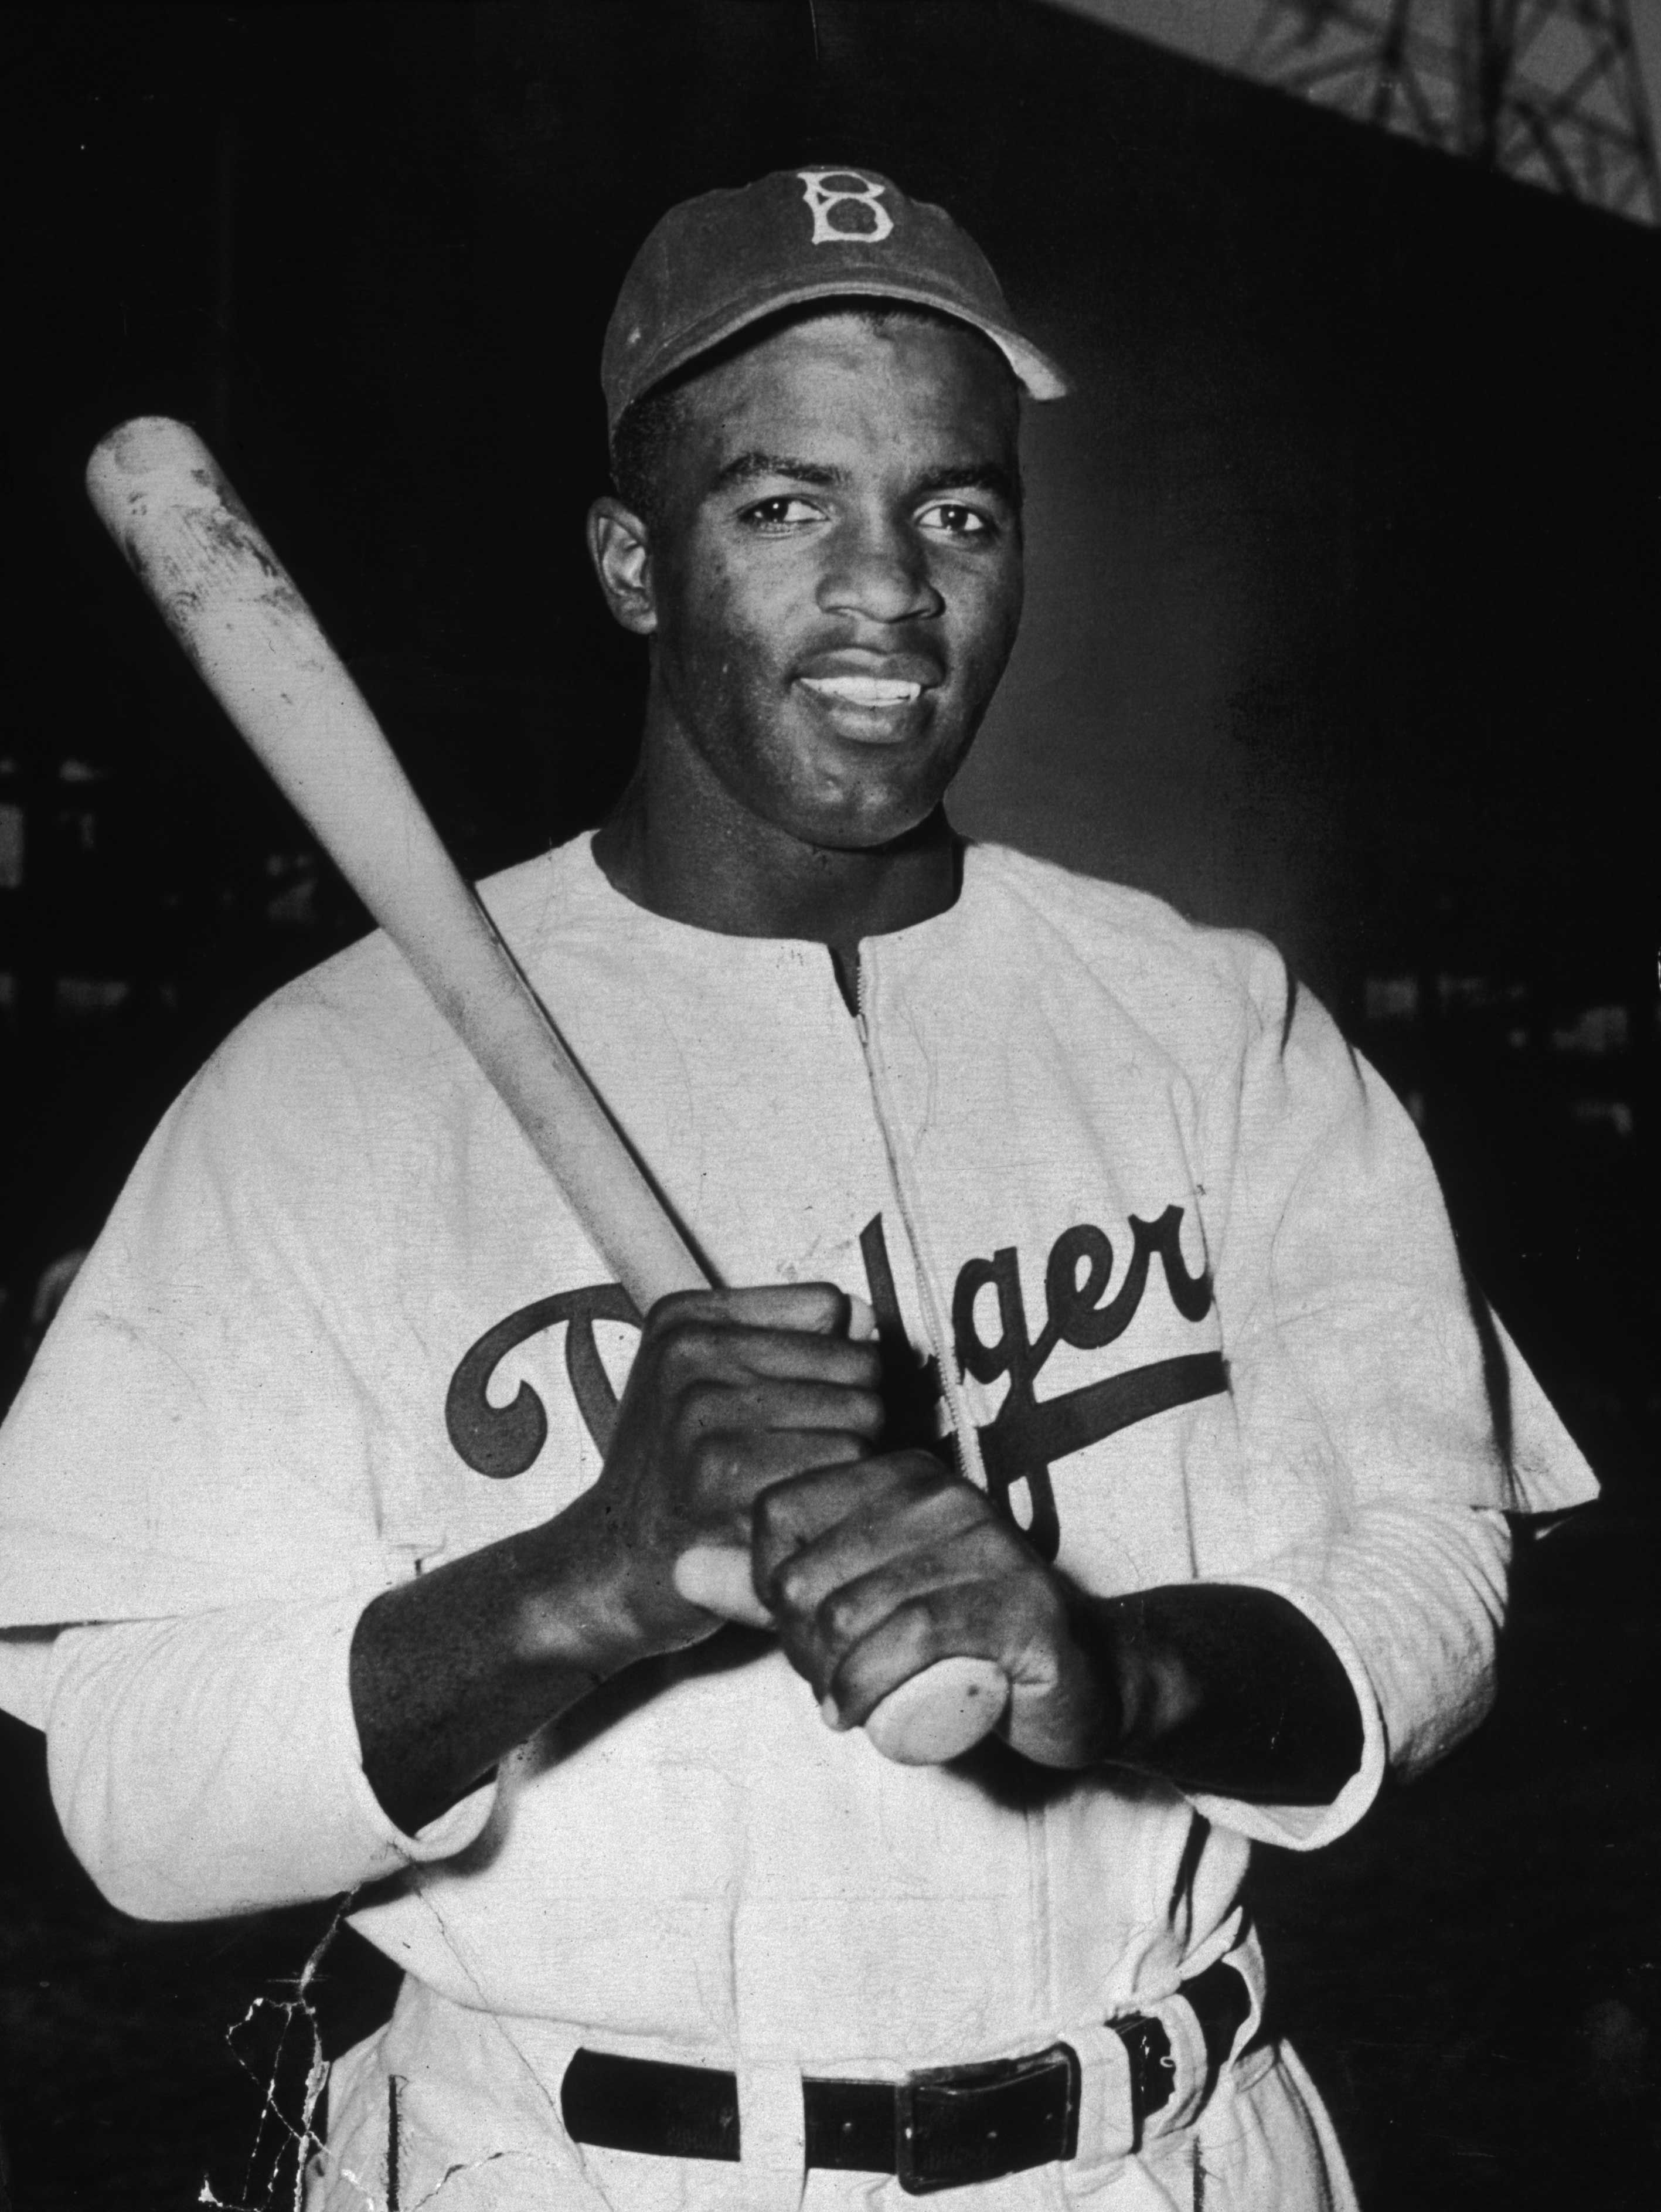 Up For Auction: Jackie Robinson's Bat